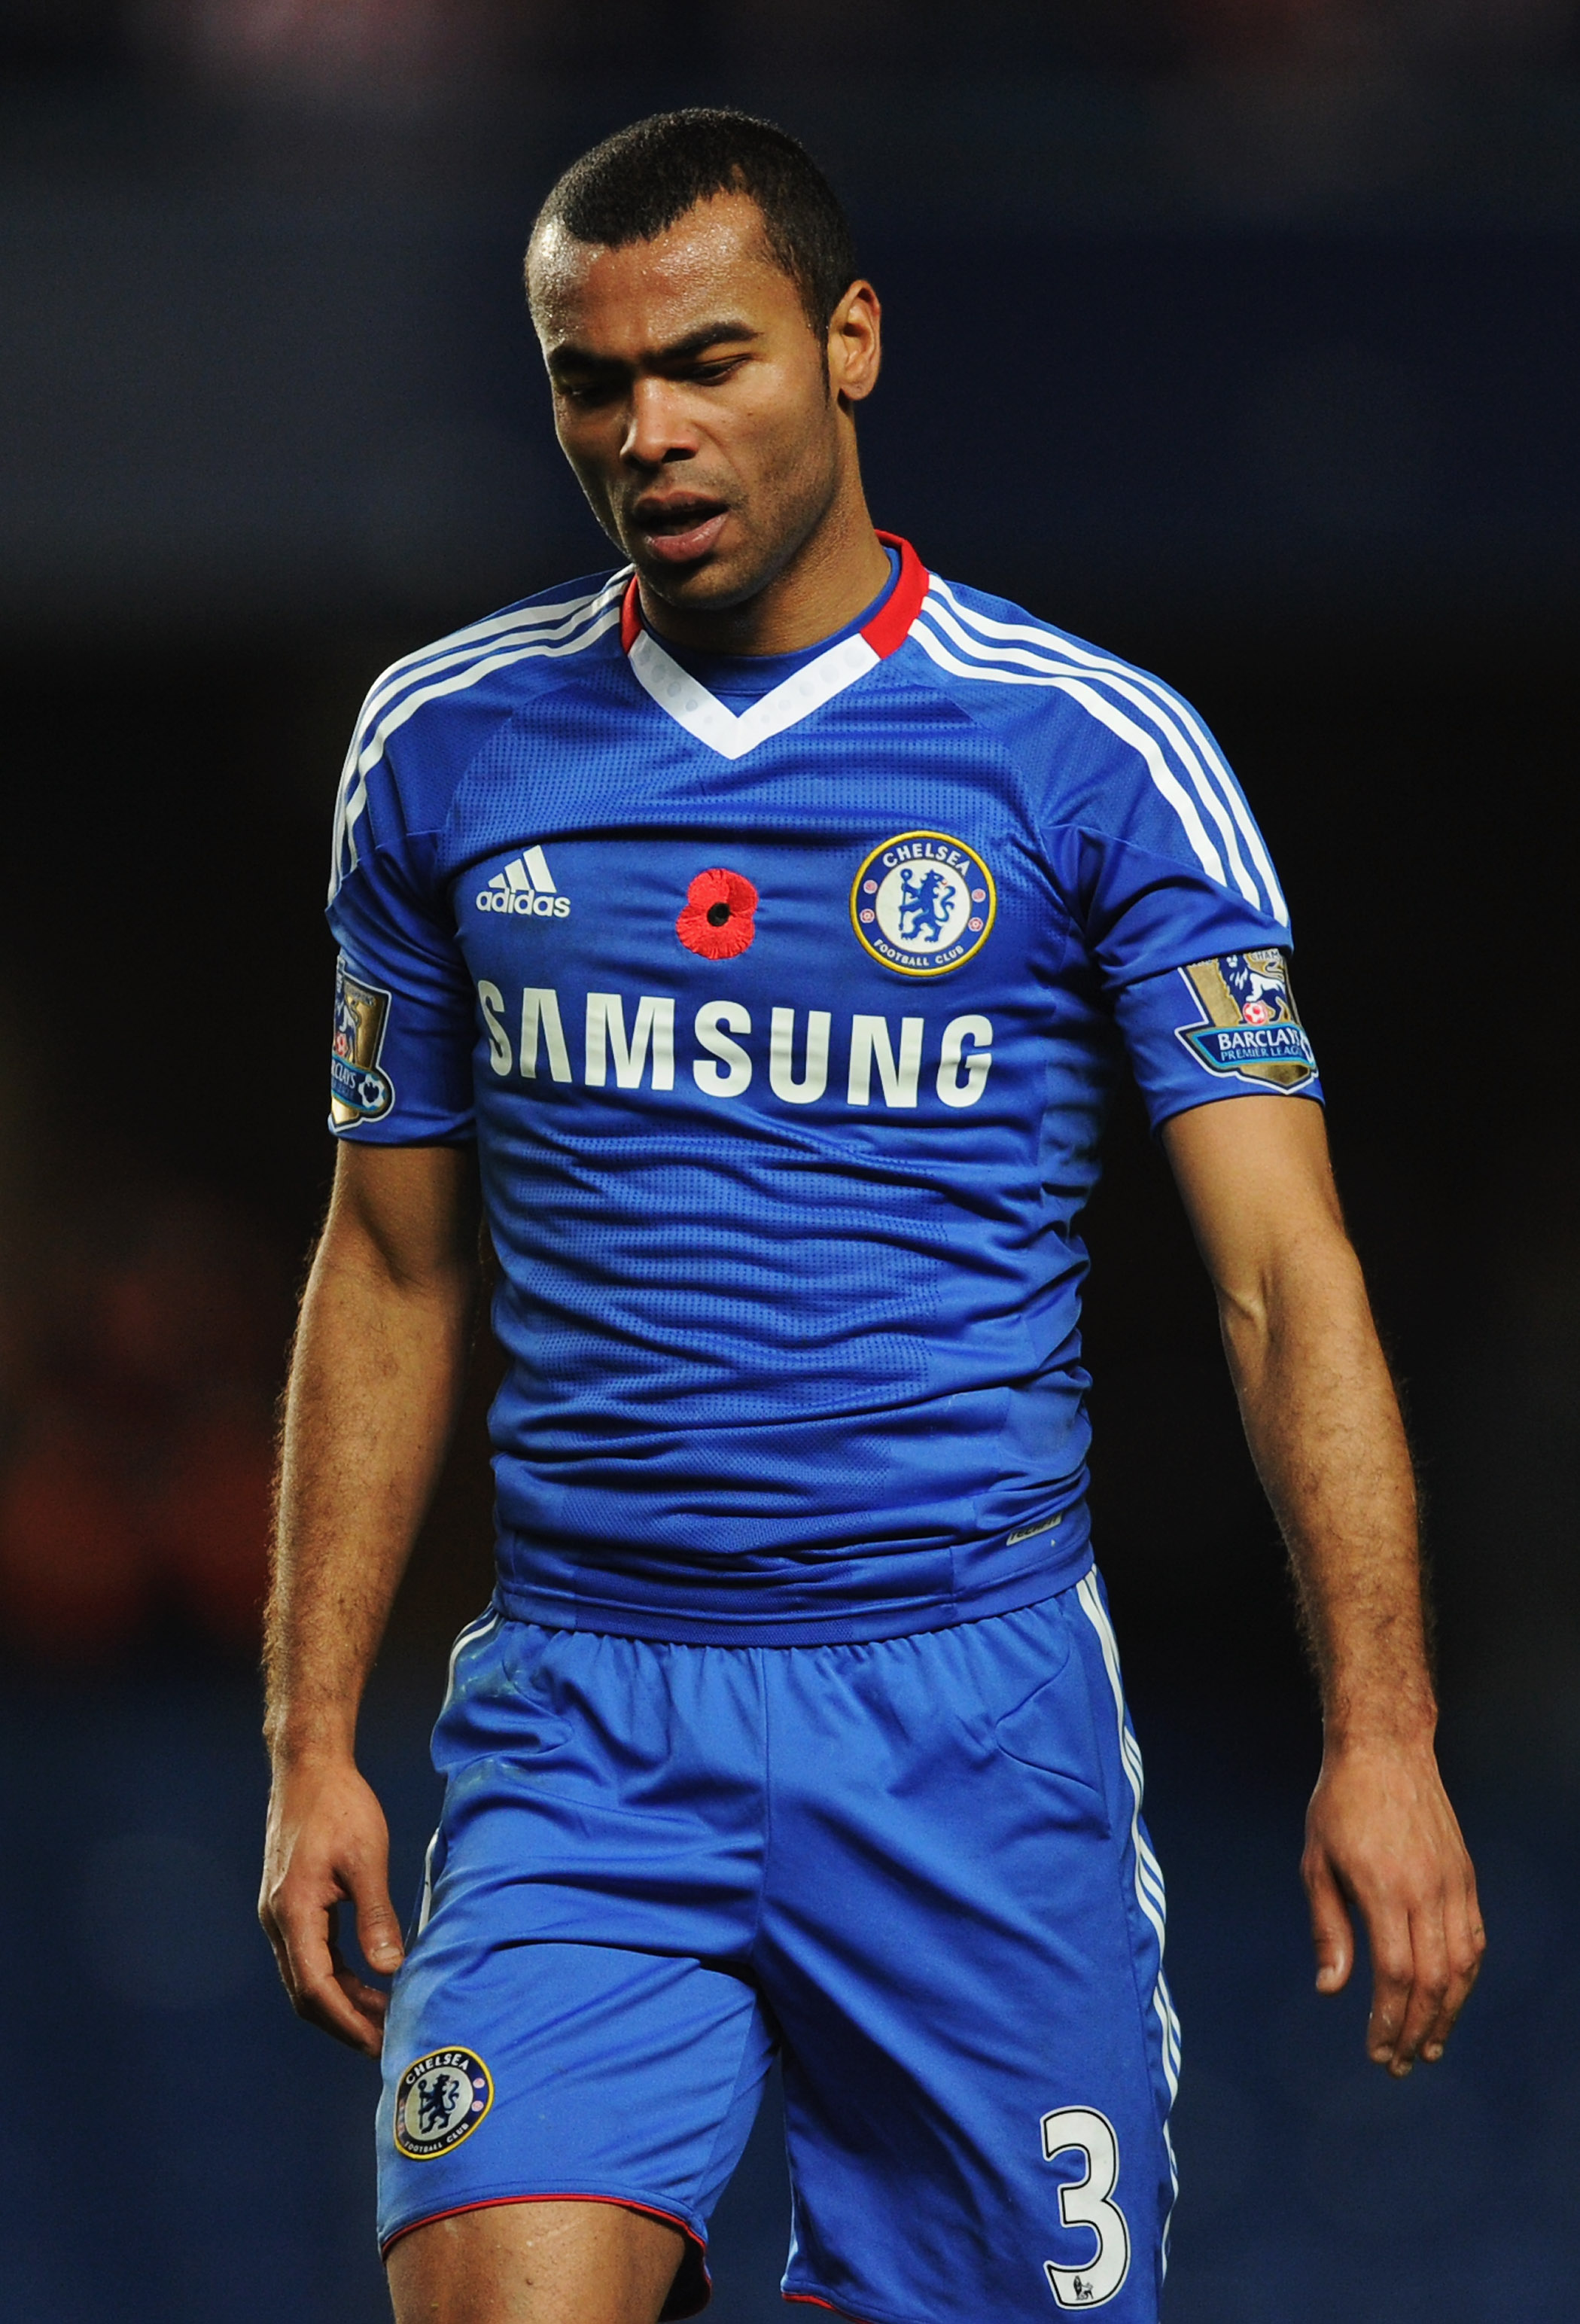 LONDON, ENGLAND - NOVEMBER 14:  Ashley Cole of Chelsea looks despondent during the Barclays Premier League match between Chelsea and Sunderland at Stamford Bridge on November 14, 2010 in London, England.  (Photo by Michael Regan/Getty Images)